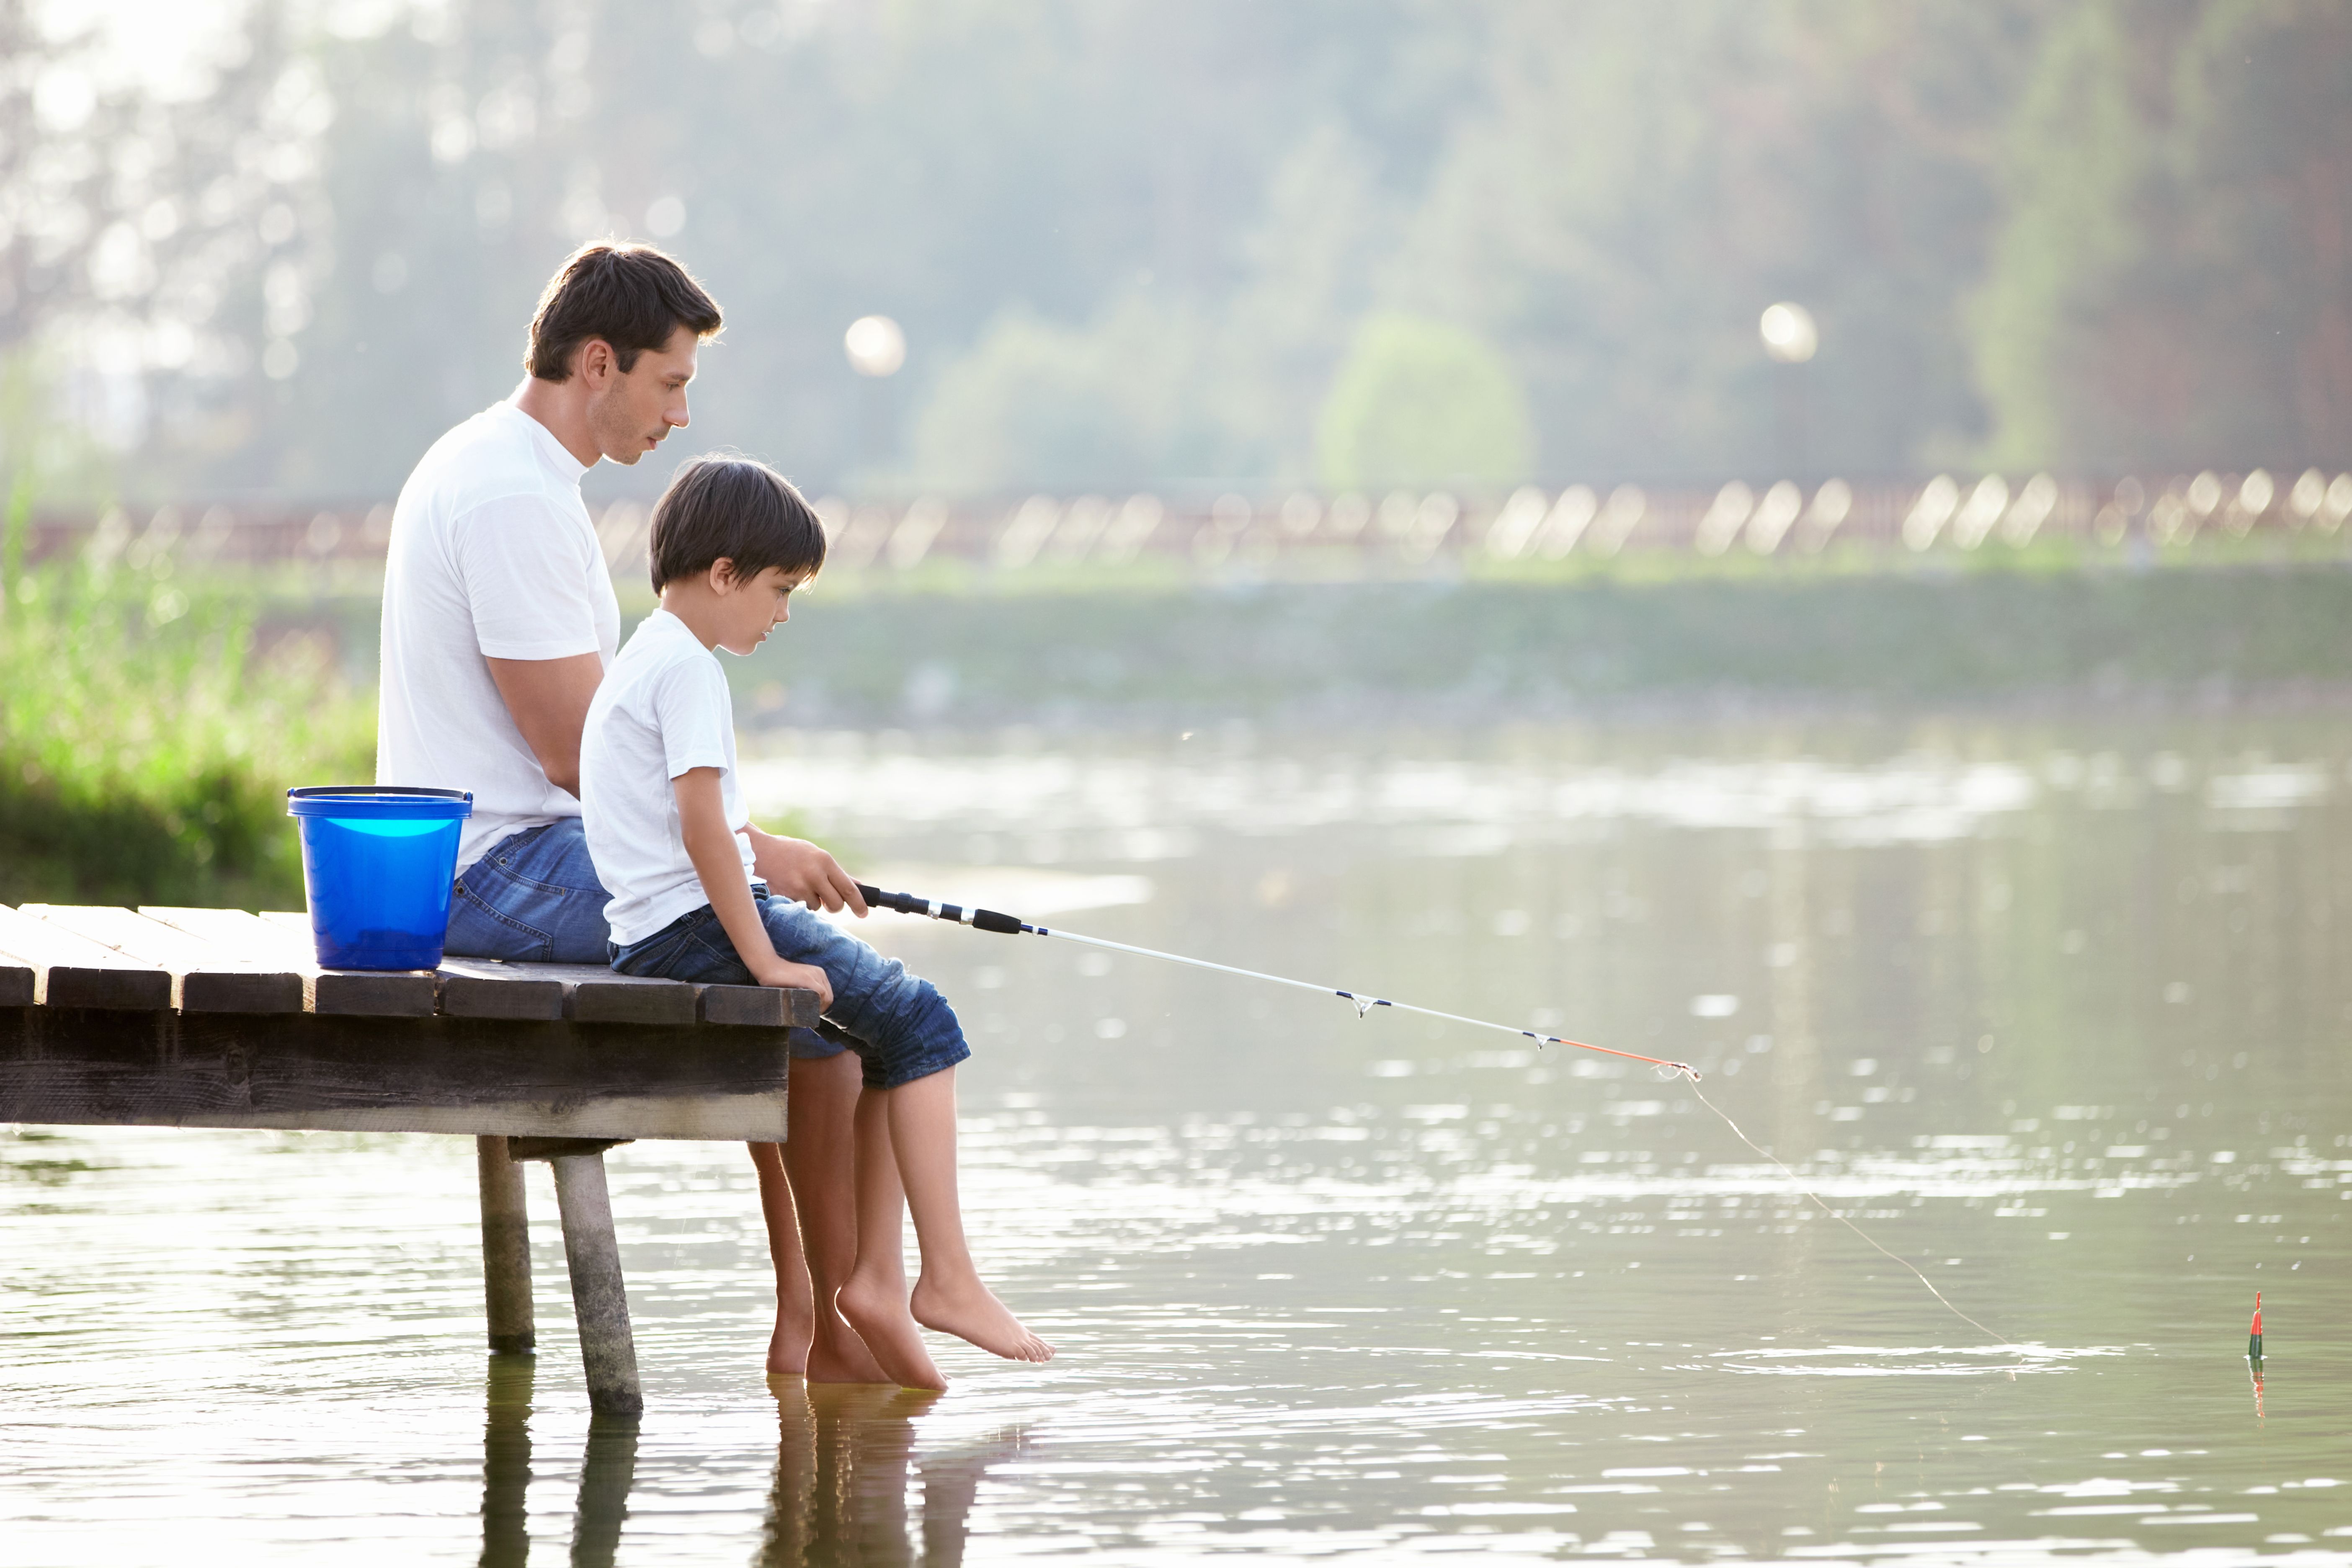 father and son fishing. Parents are PMA members to protect their children